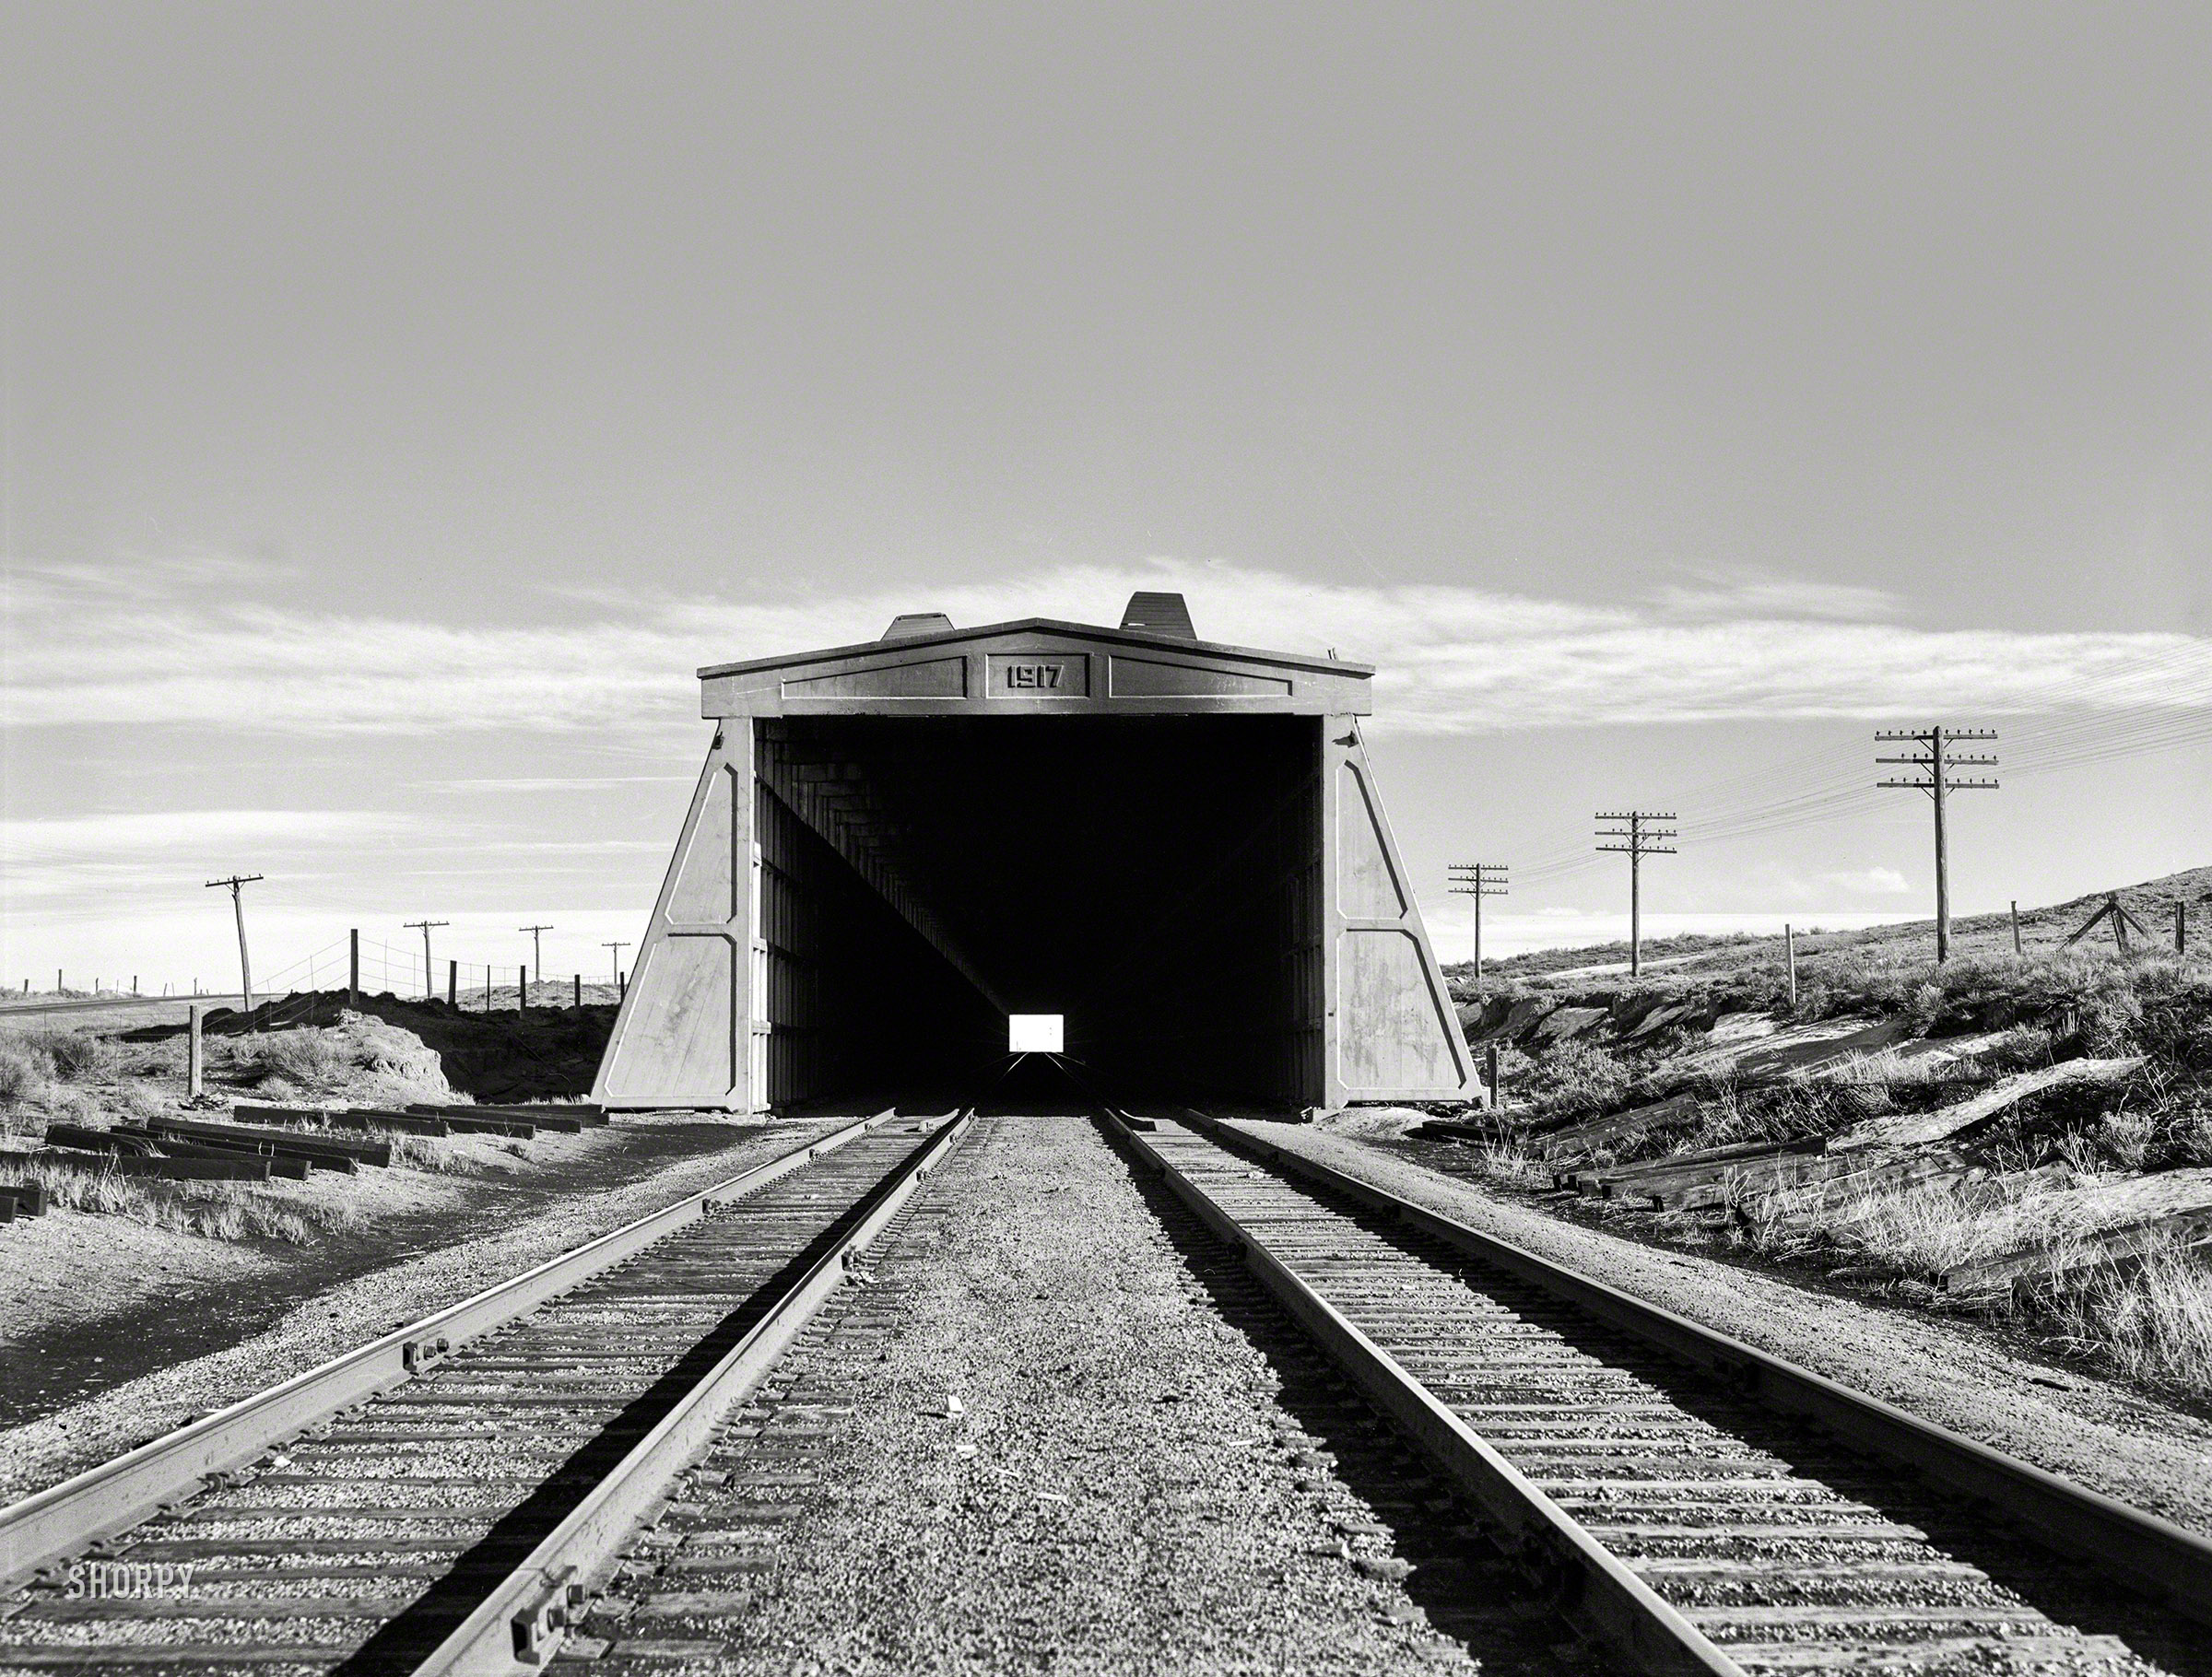 March 1940. "Snow shed over Union Pacific tracks. Carbon County, Wyoming." Photo by Arthur Rothstein for the Farm Security Administration. View full size.